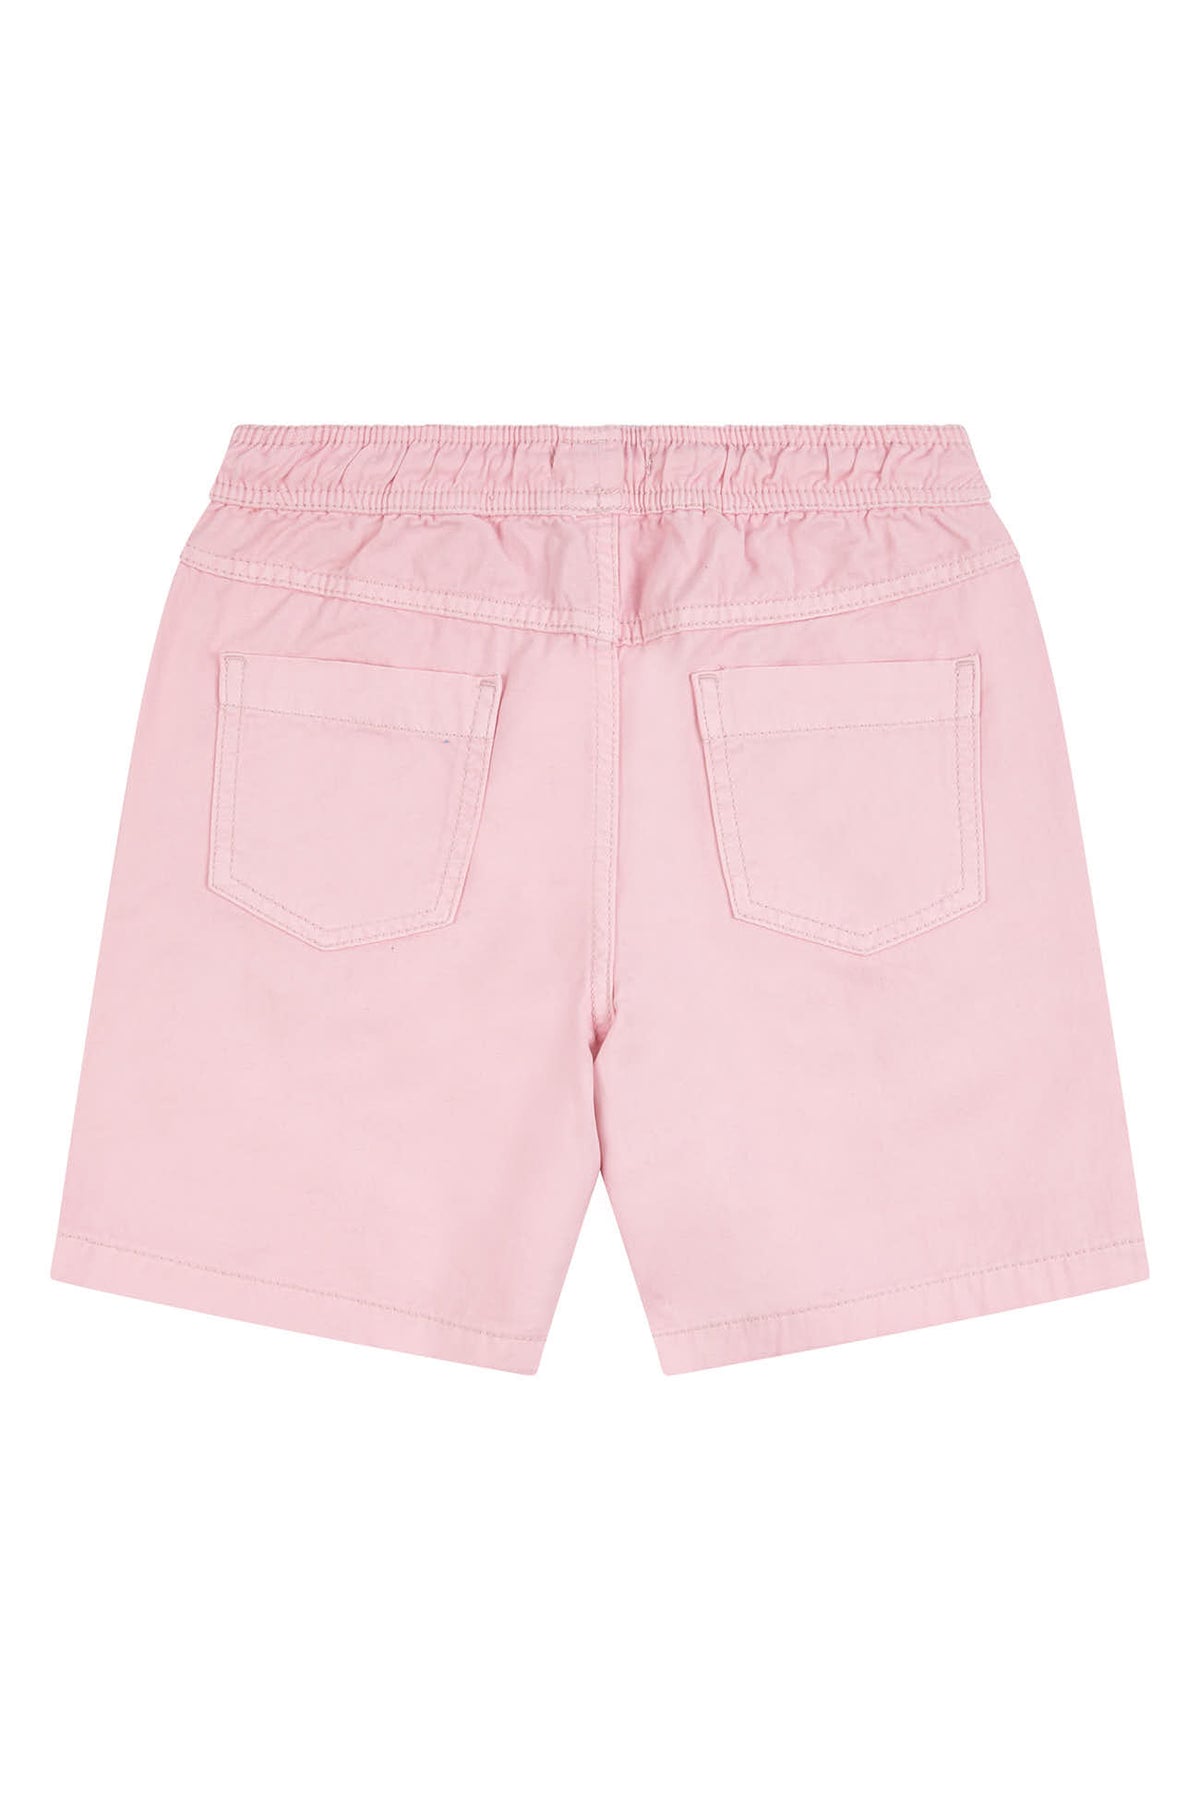 Boys Classic Shorts in Orchid Pink